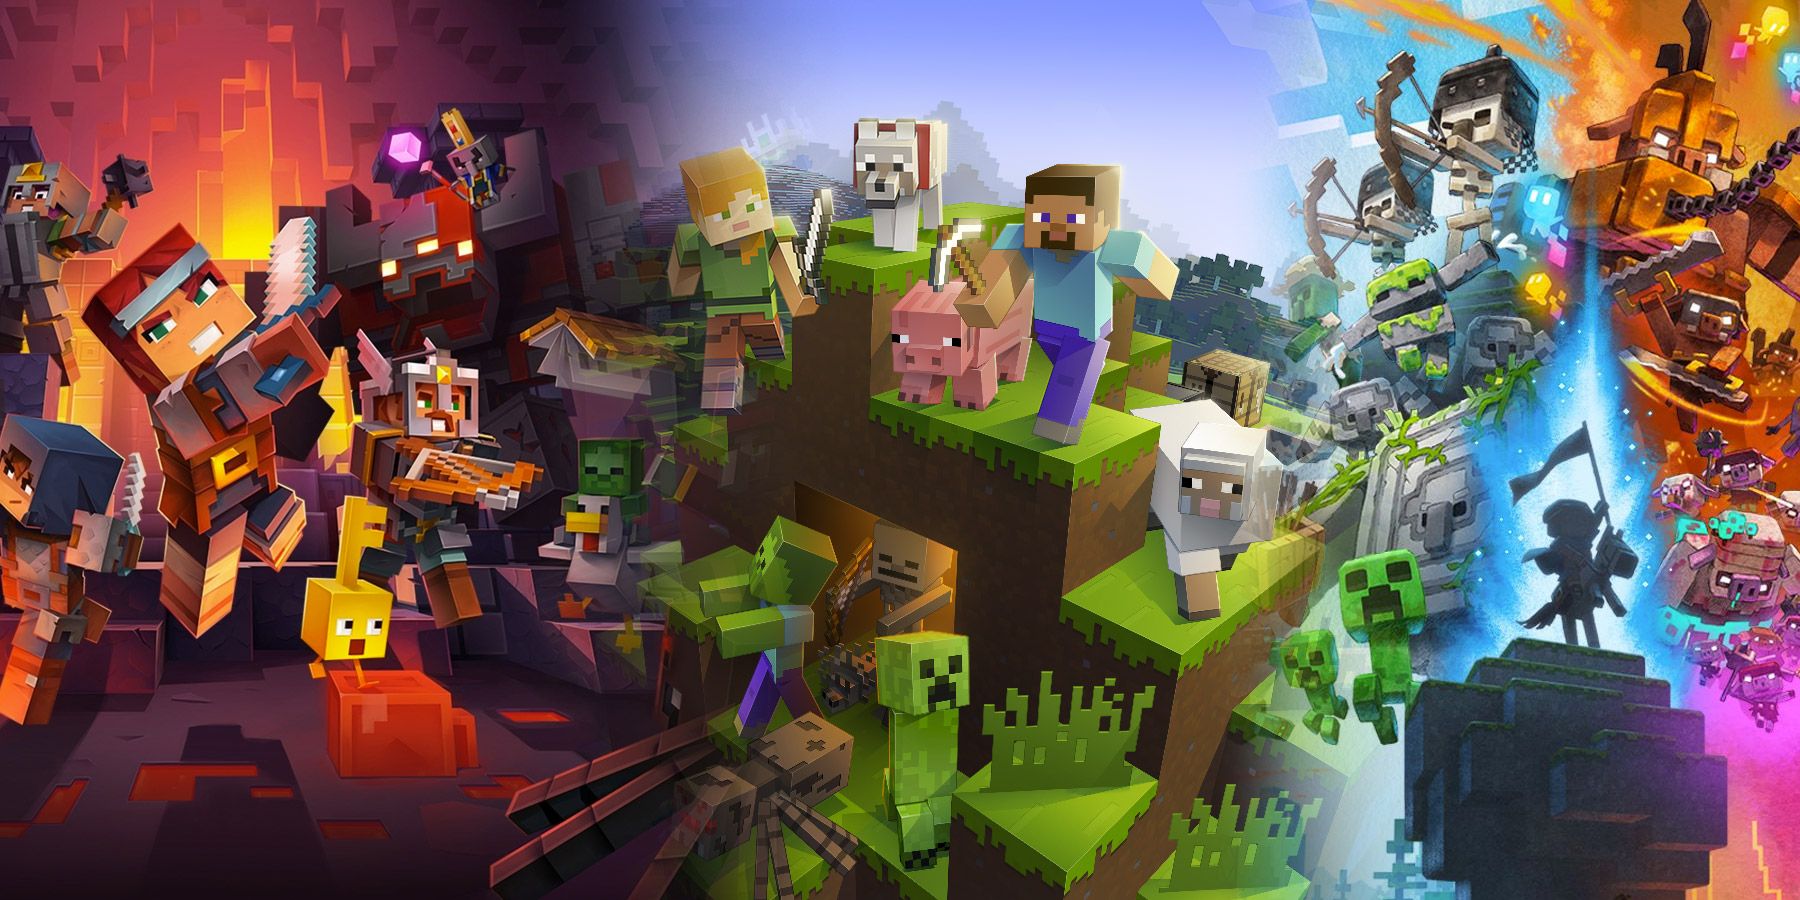 Other Genres that Minecraft Spin-Offs Could Take